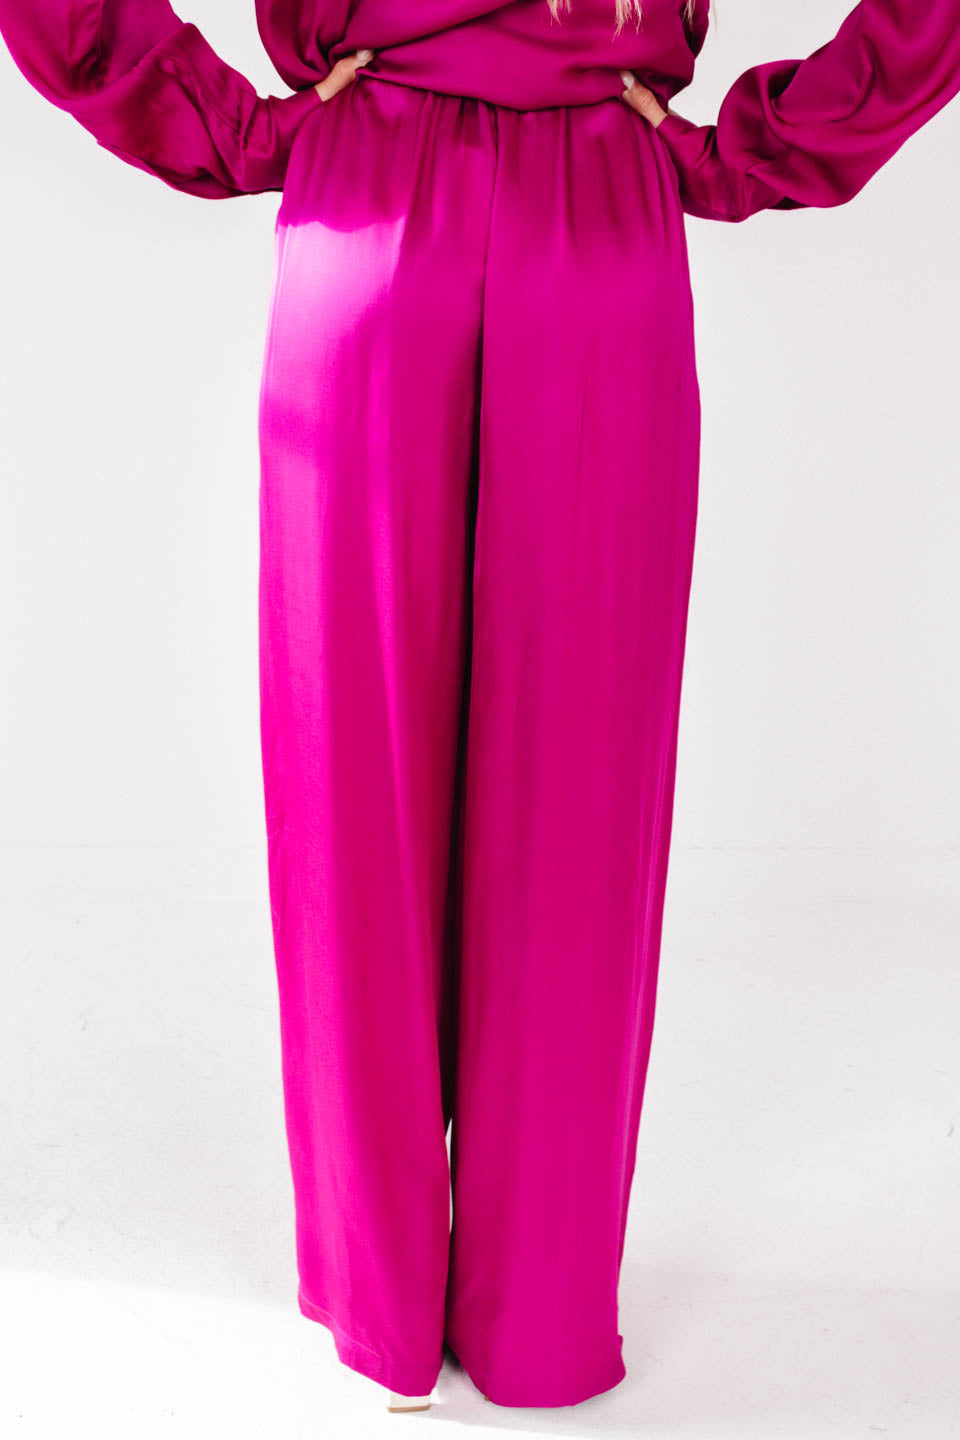 Meet Your Match Pants - Fuchsia – The Impeccable Pig